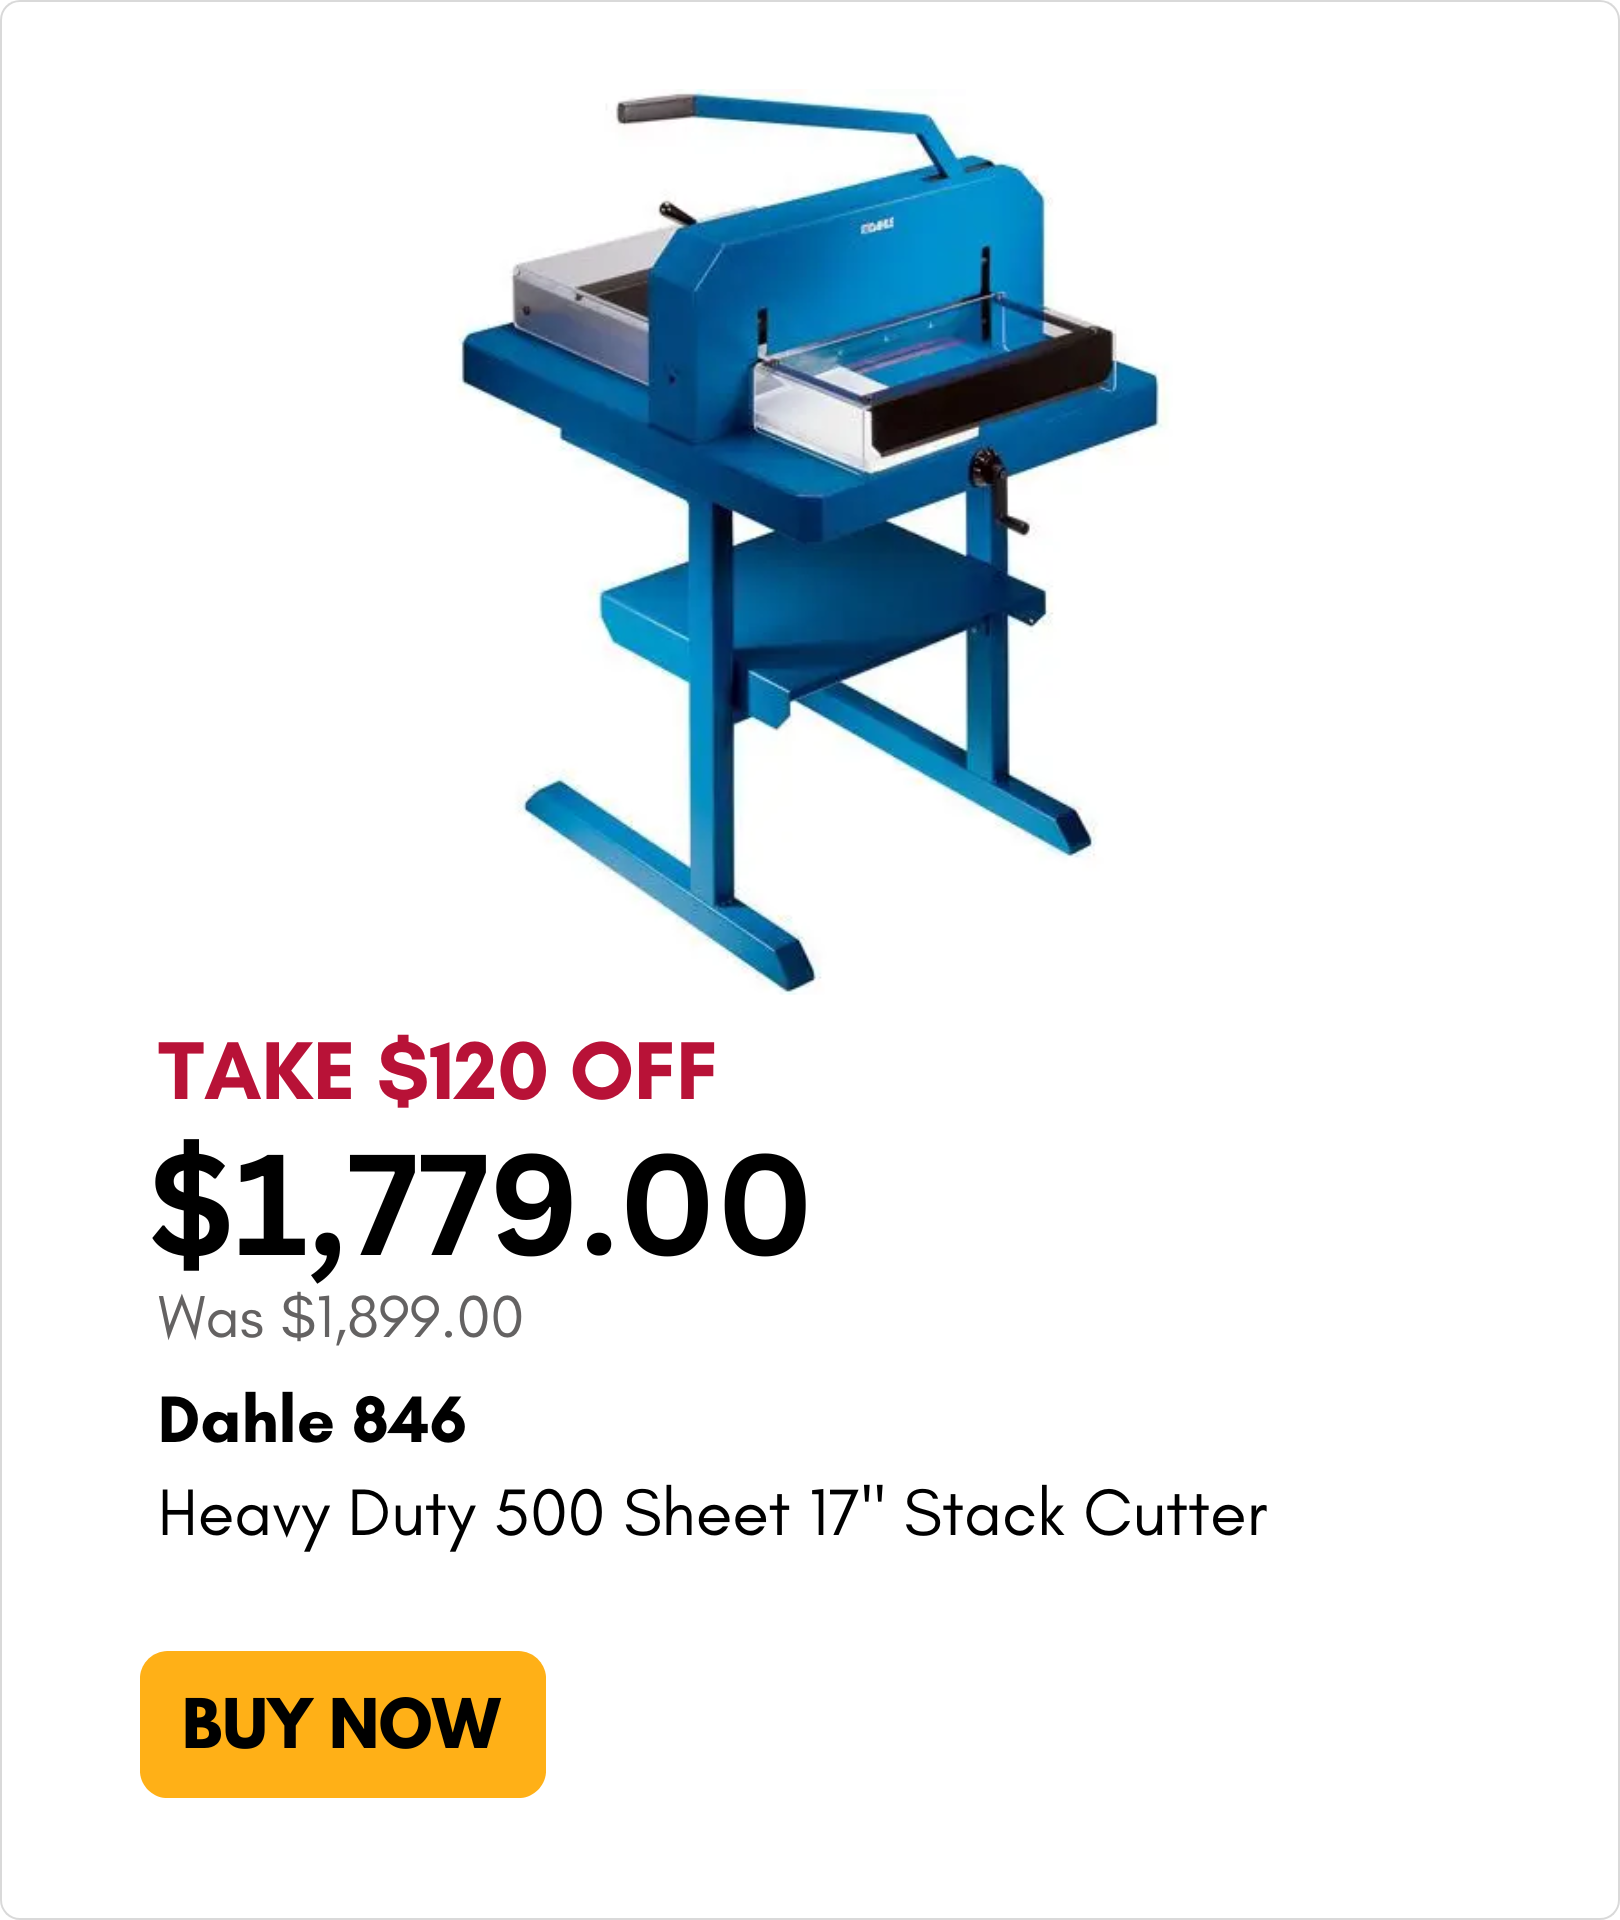 Dahle 846 Heavy Duty 500 Sheet 17-Inch Stack Cutter on sale for $120 off on MyBinding.com